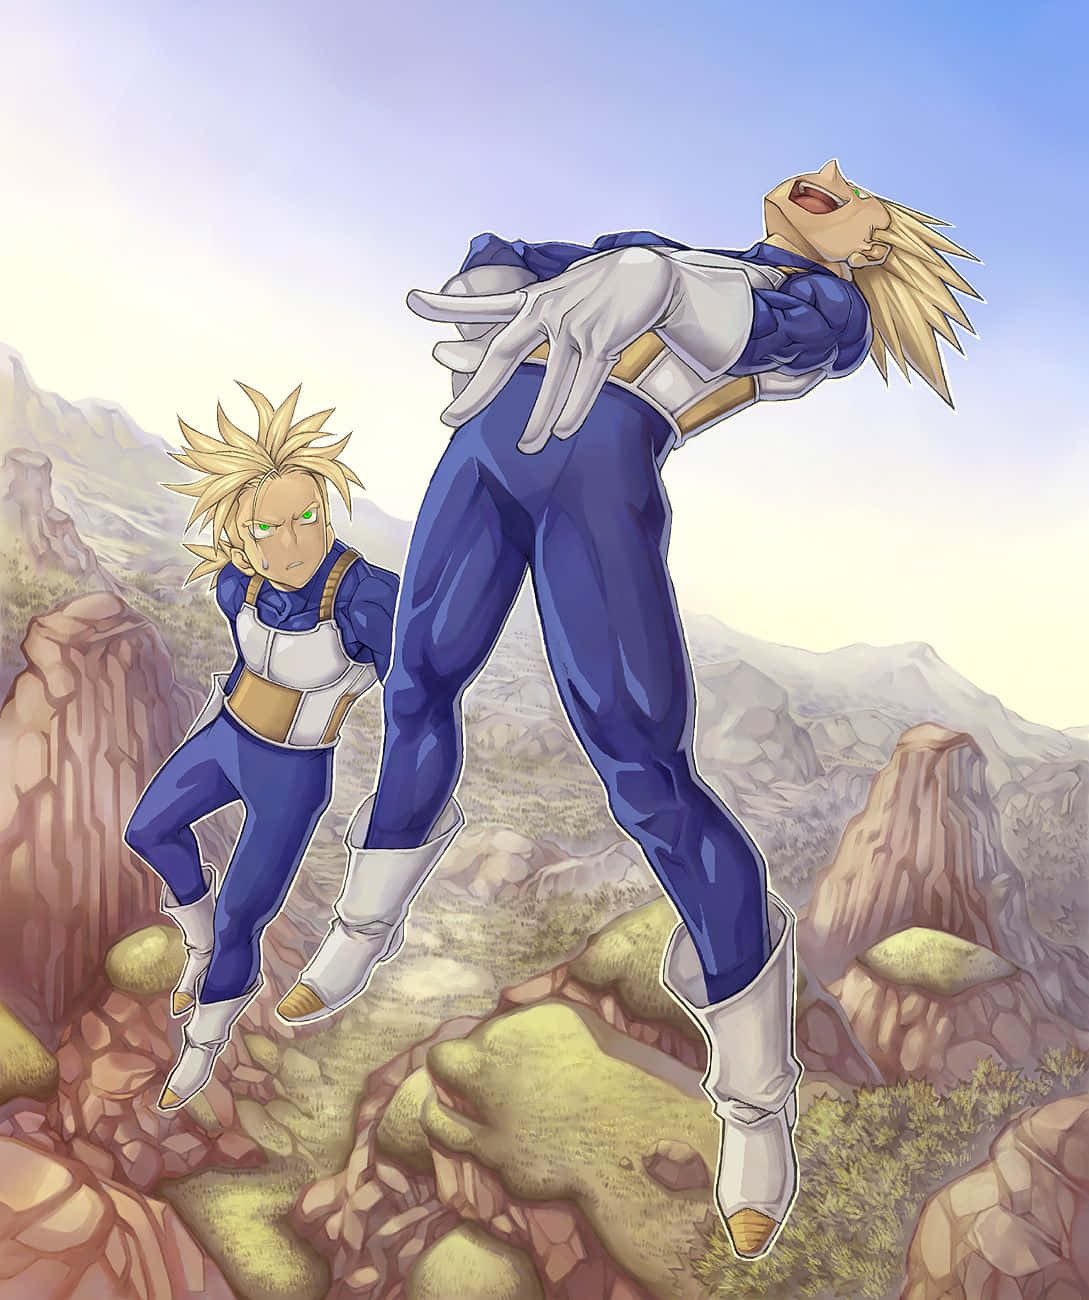 The Dynamic Duo of Vegeta and Trunks Wallpaper